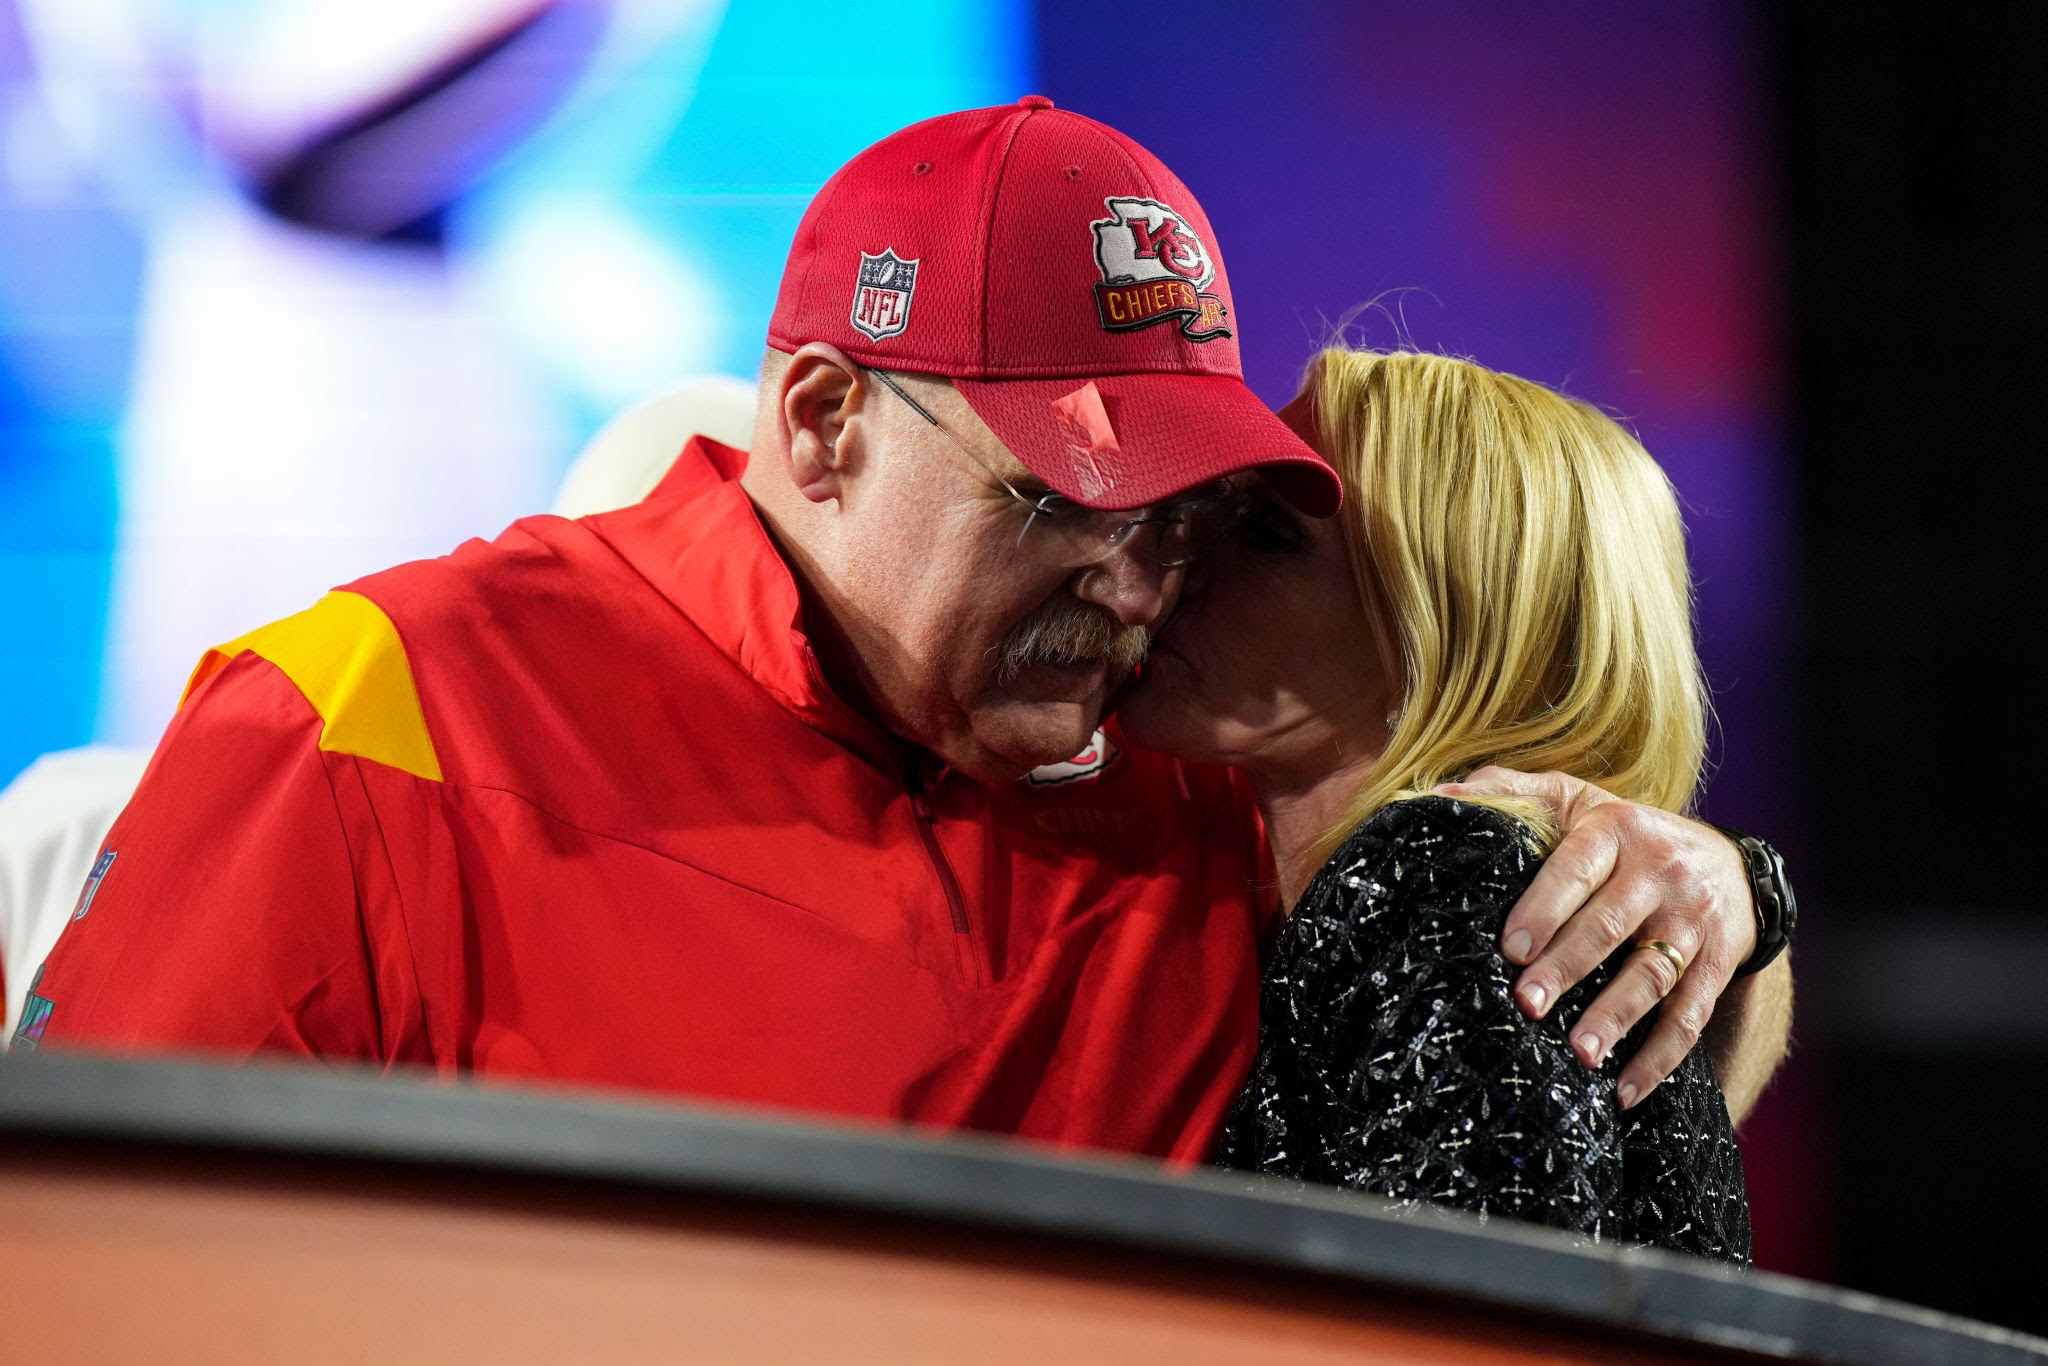 "Too sad, Chiefs coach Andy Reid bids his wife farewell as they officially end their 45-year marriage - 'I think she deserves more.'"